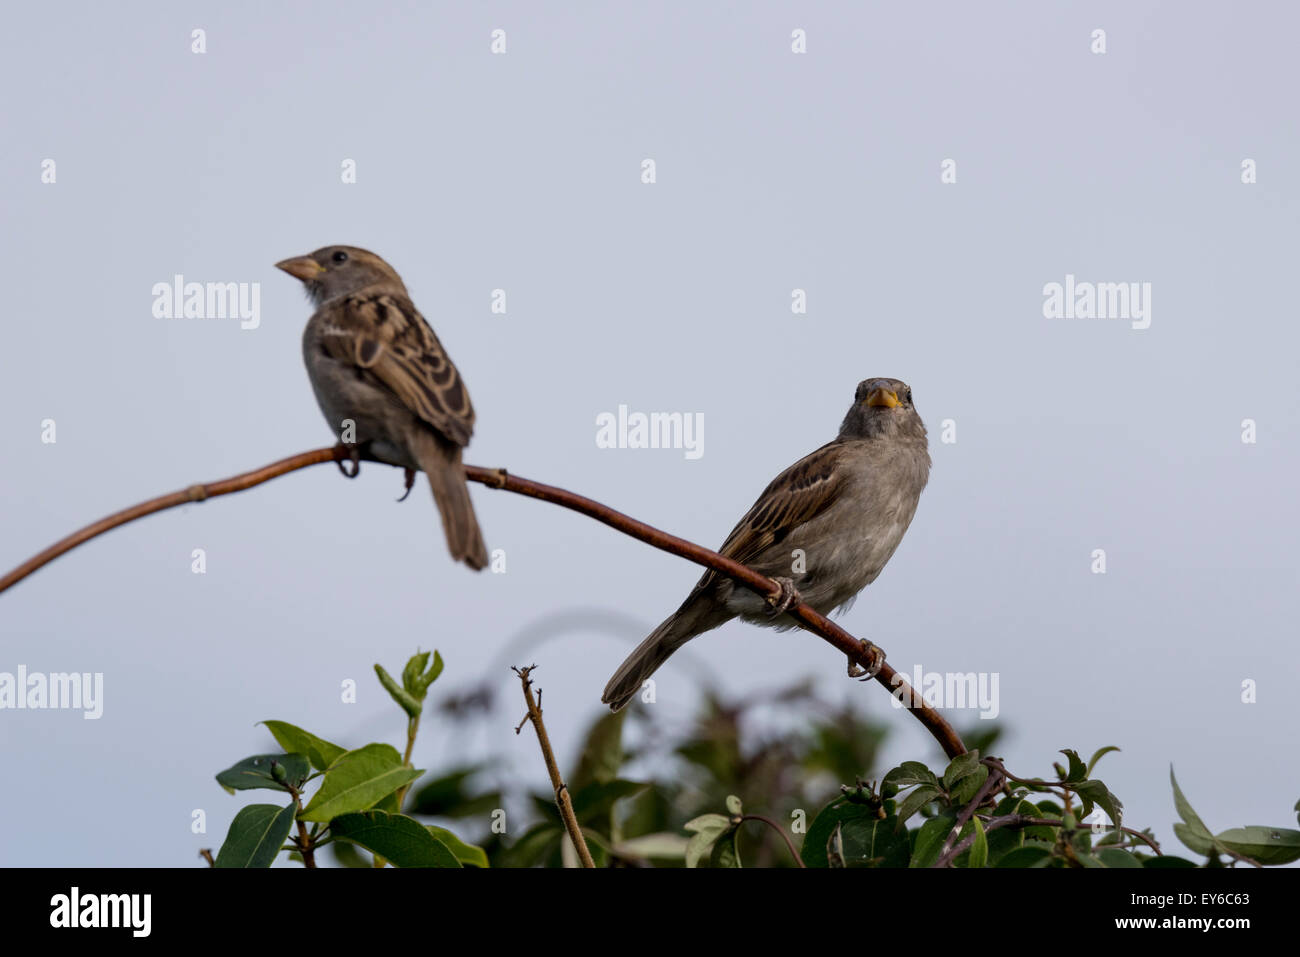 Female House Sparrows perched on a stem Stock Photo